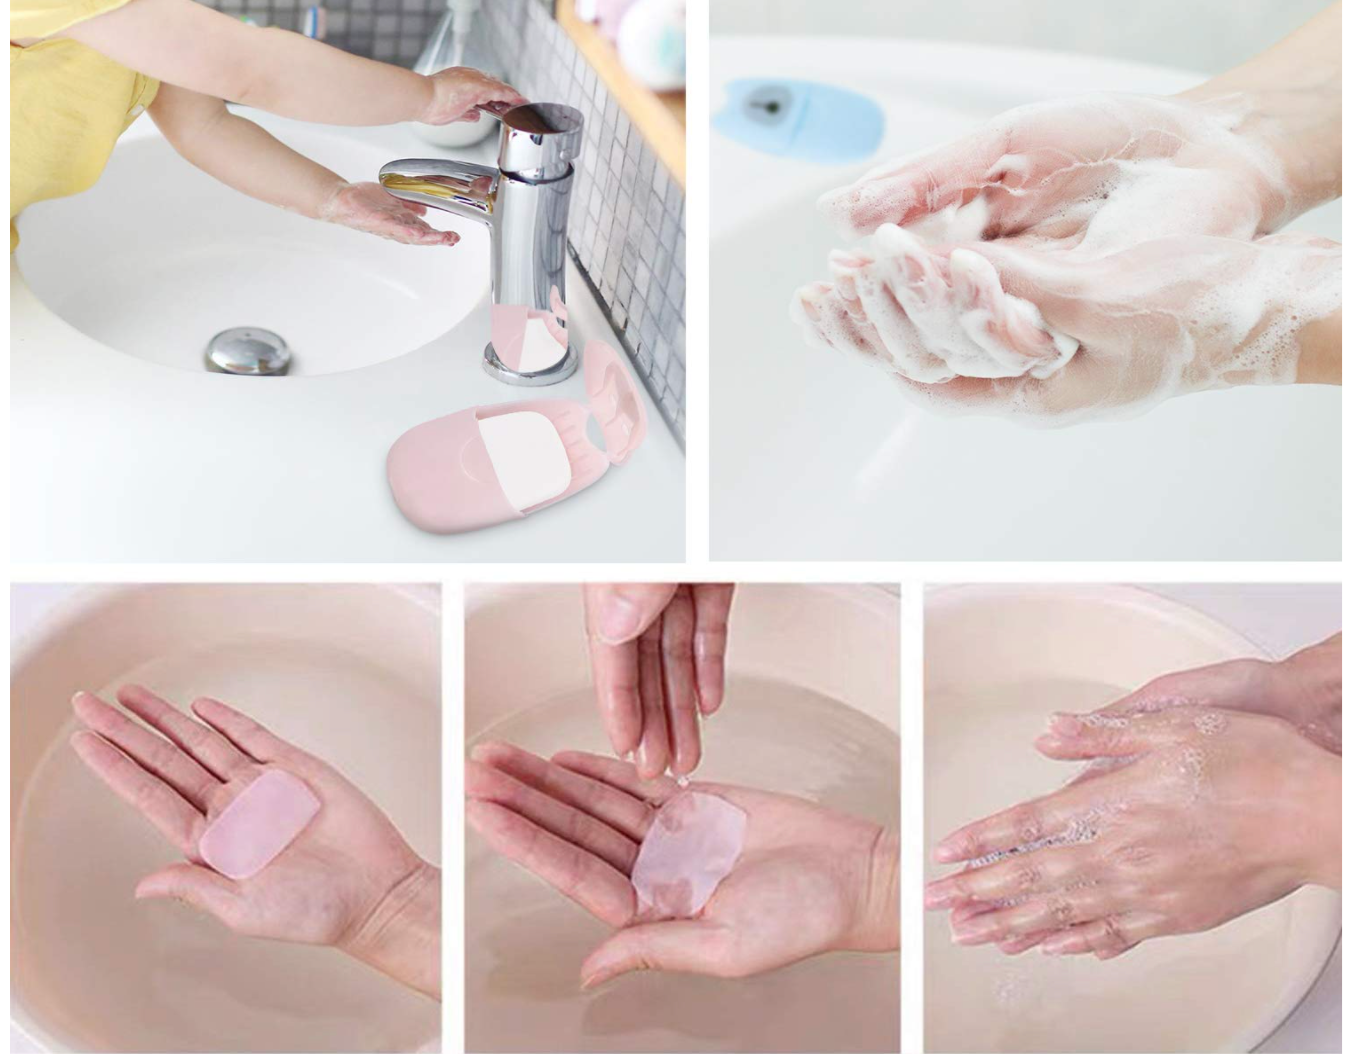 Mode using a thin sheet pulled from a small pink dispenser to wash their hands 